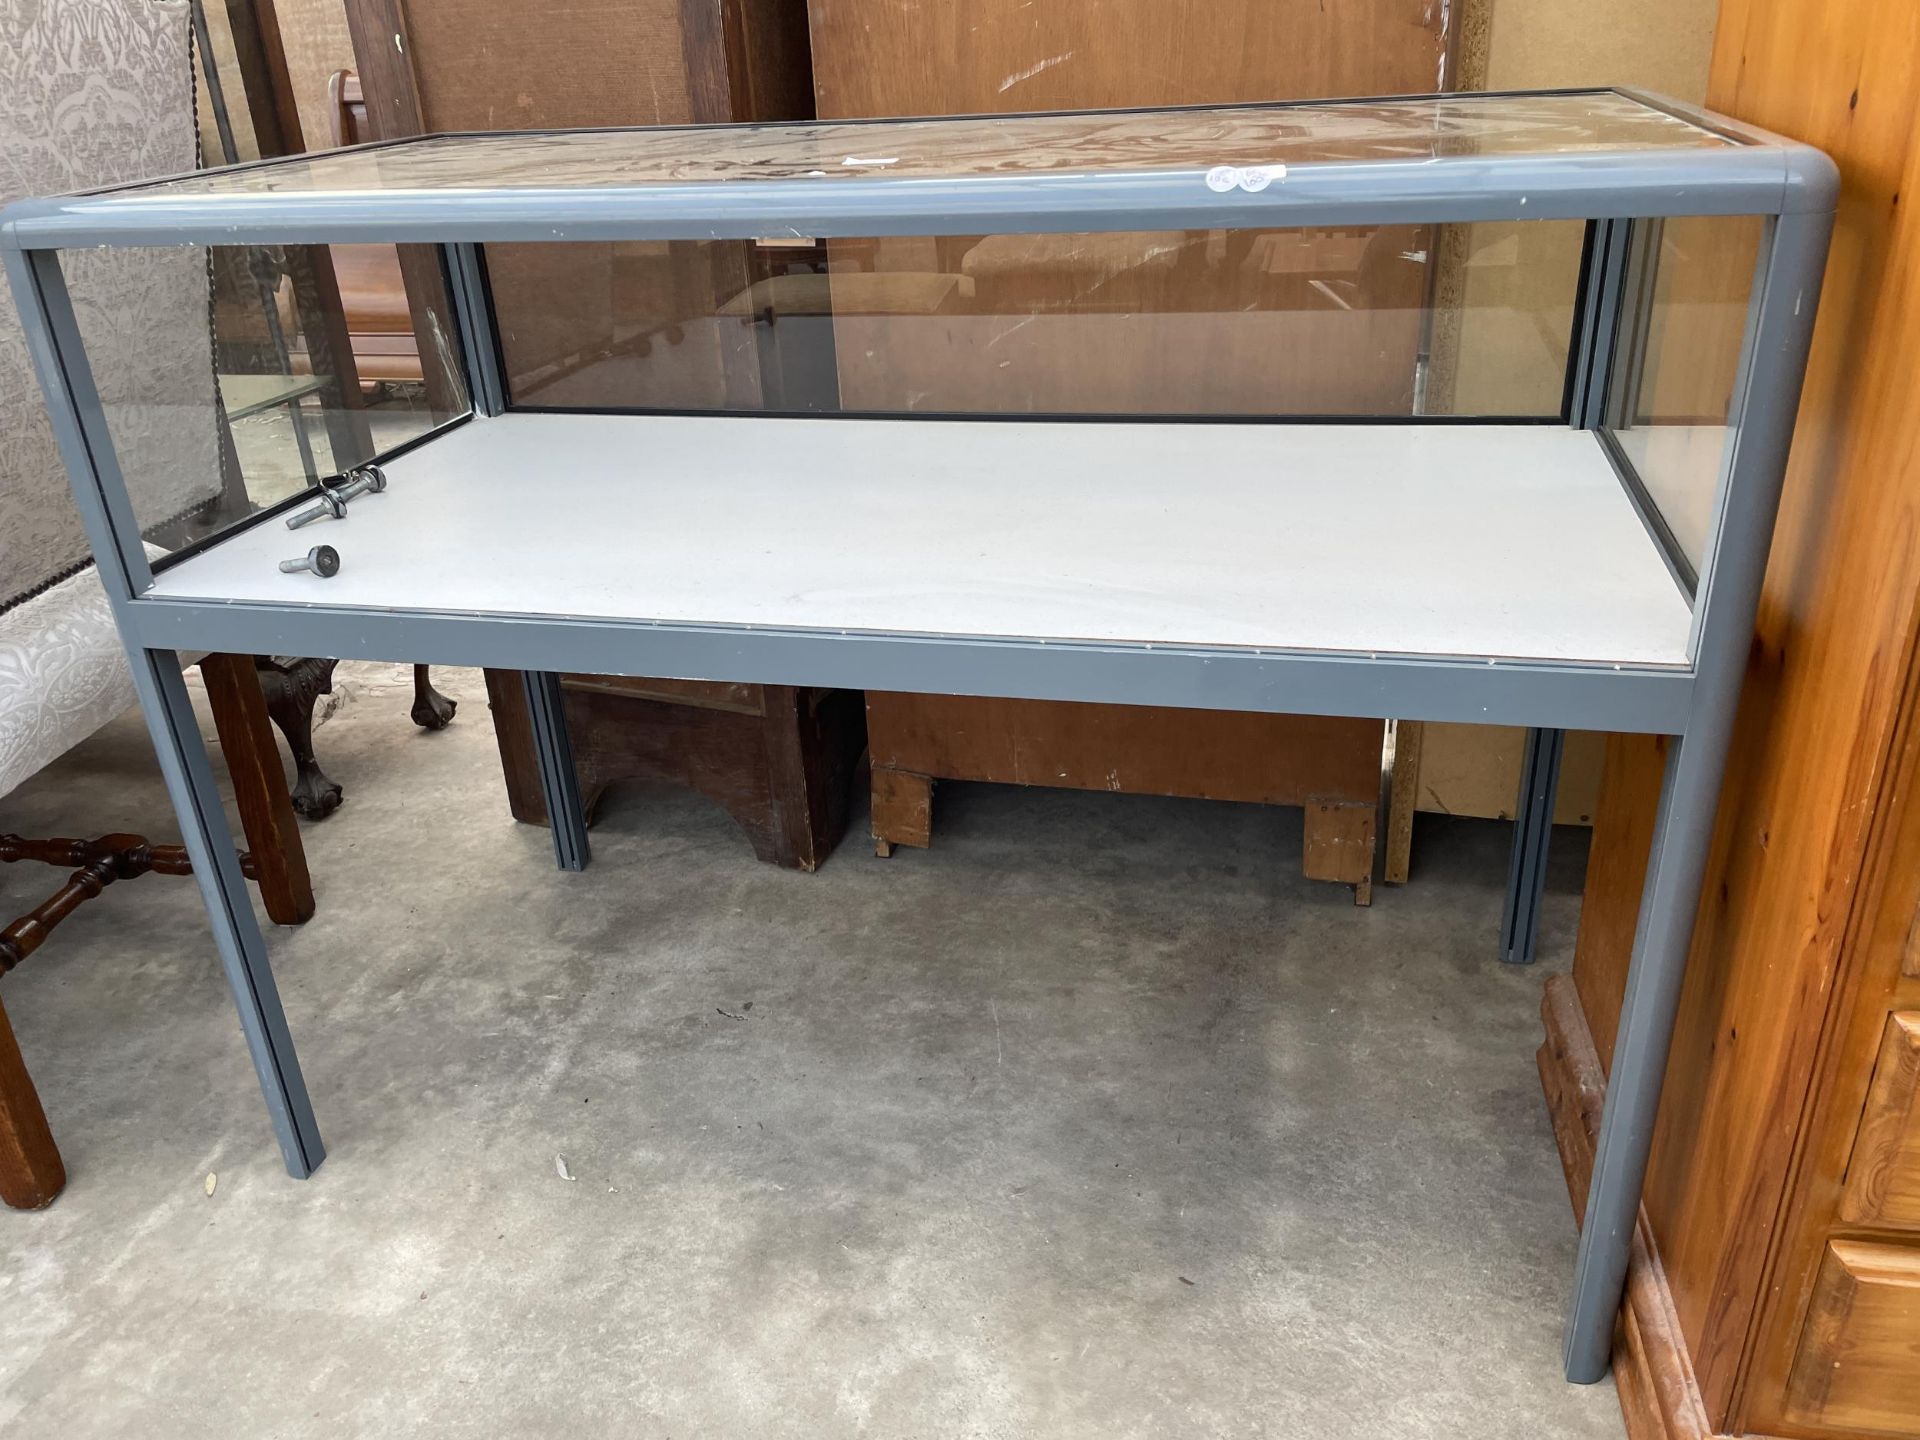 A MODERN METALWARE FRAMED GLASS DISPLAY COUNTER, 47 X 24" - Image 2 of 2